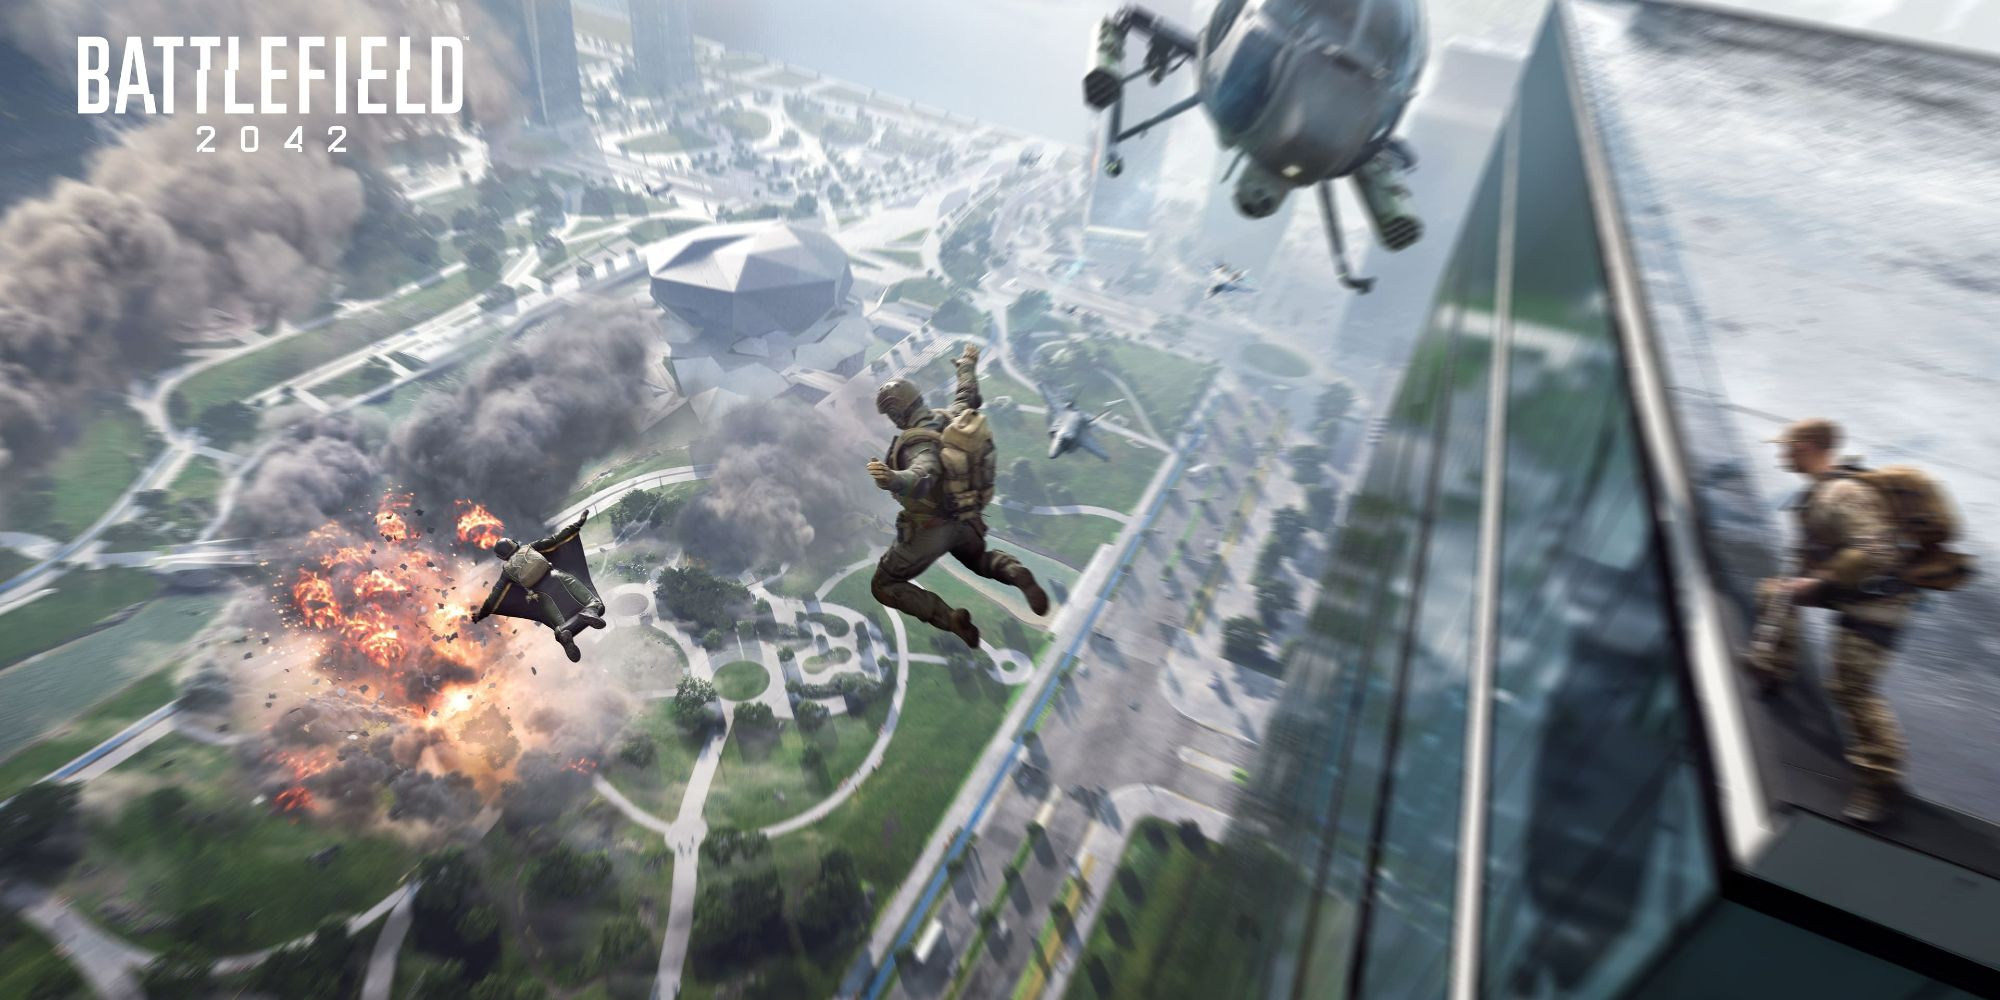 Players jumping off a roof and using a wingsuit in Battlefield 2042.